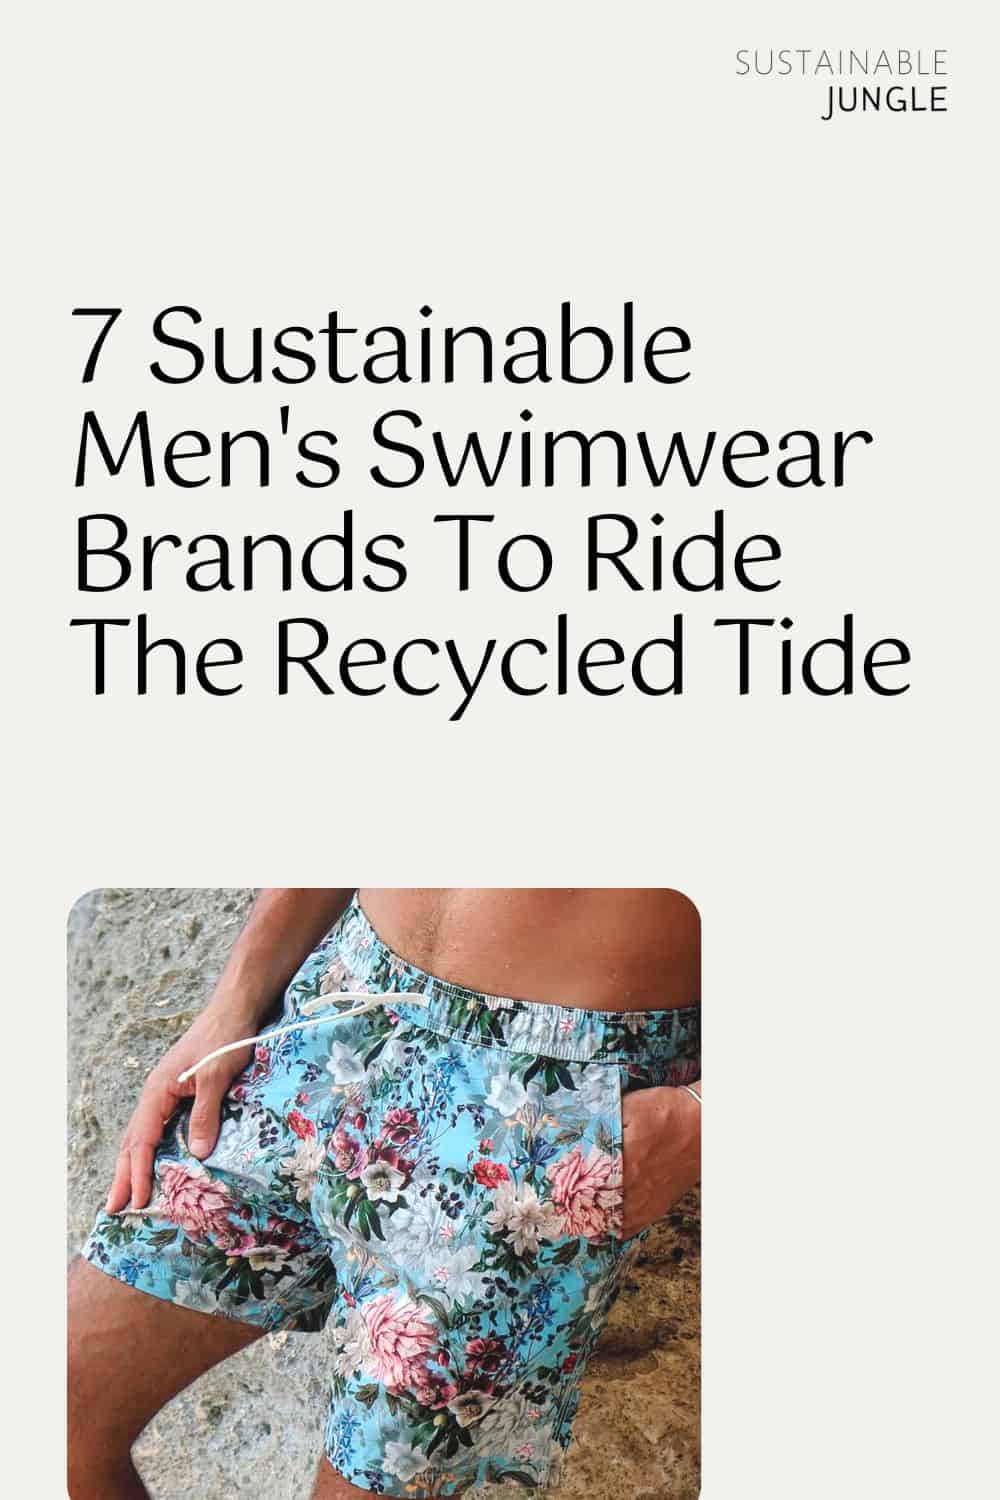 7 Sustainable Men's Swimwear Brands To Ride The Recycled Tide Image by Riz Board Shorts #sustainablemensswimwear #mensustainableswimwear #sustainableswimwearmens #sustainableboardshorts #ecofriendlymensswimwearbrands #ecofriendlyswimwearformen #sustainablejungle